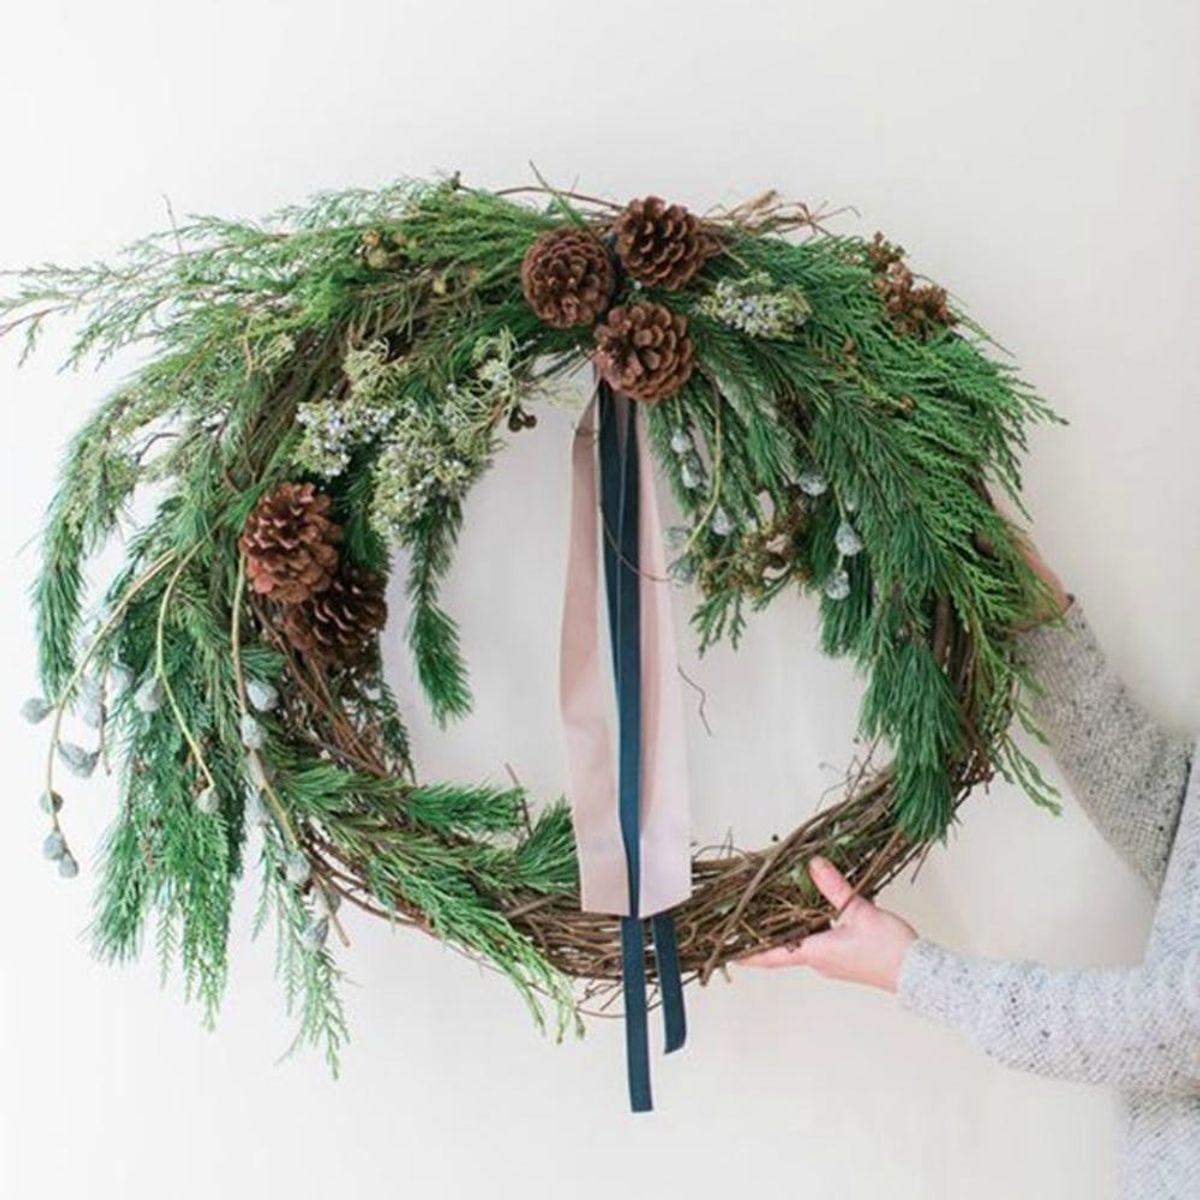 8 Wreaths to Get Your Winter Wedding Ready